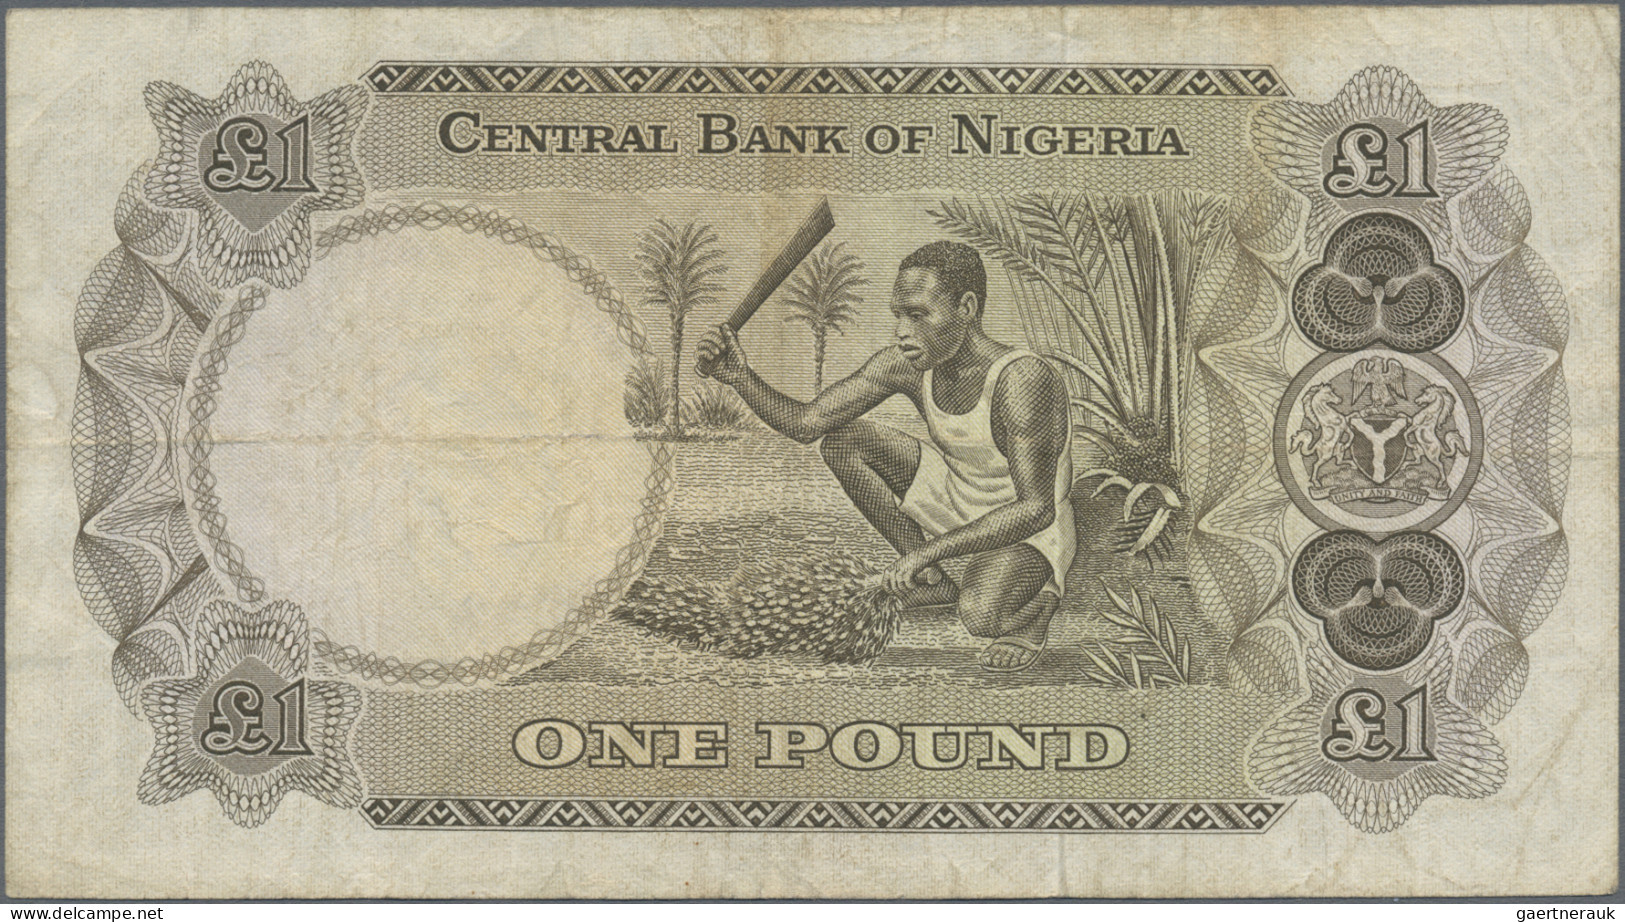 Nigeria: Central Bank of Nigeria, lot with 5 banknotes, series 1967/68, with 1 P